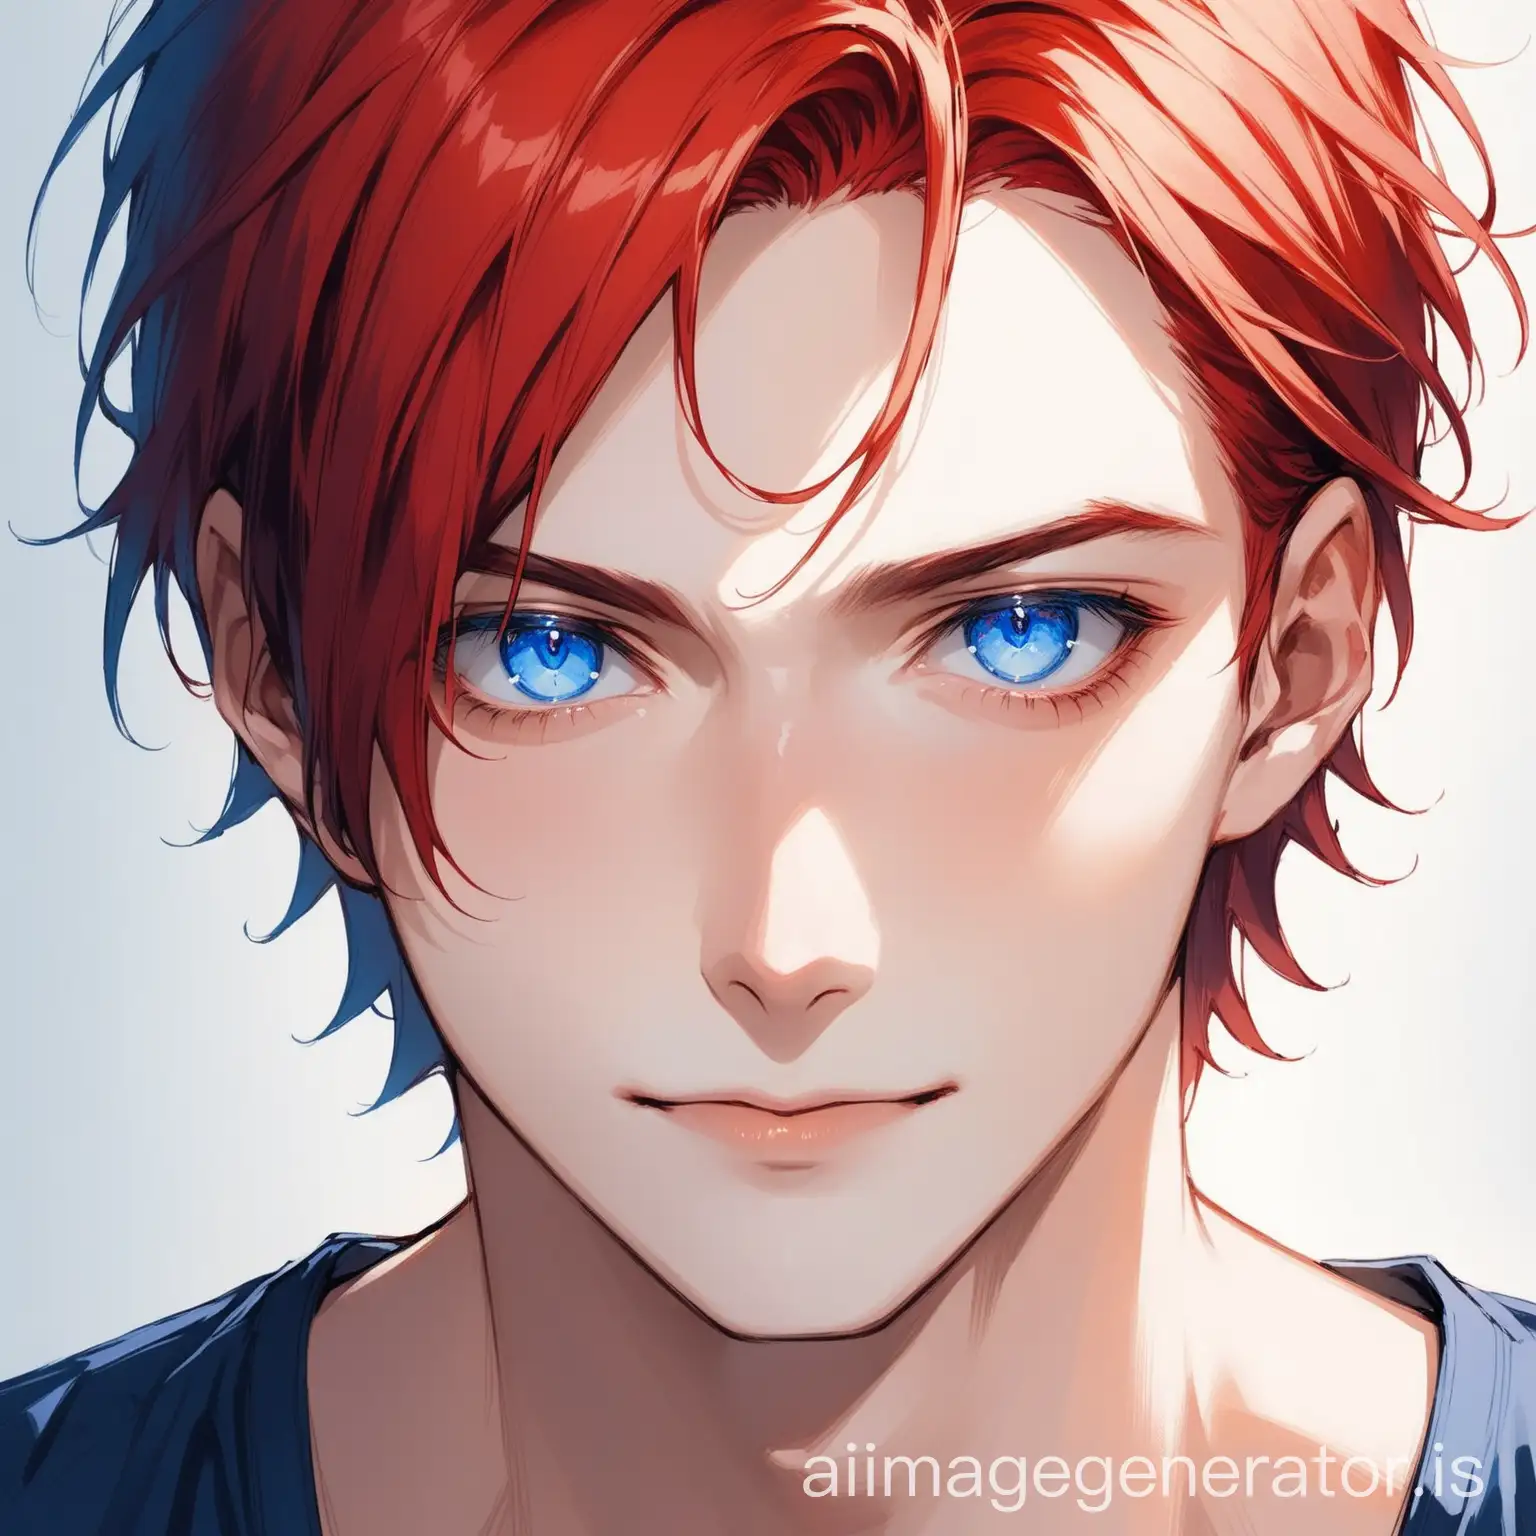 Innocent-Portrait-of-a-FairSkinned-Man-with-Red-Hair-and-Blue-Indigo-Eyes